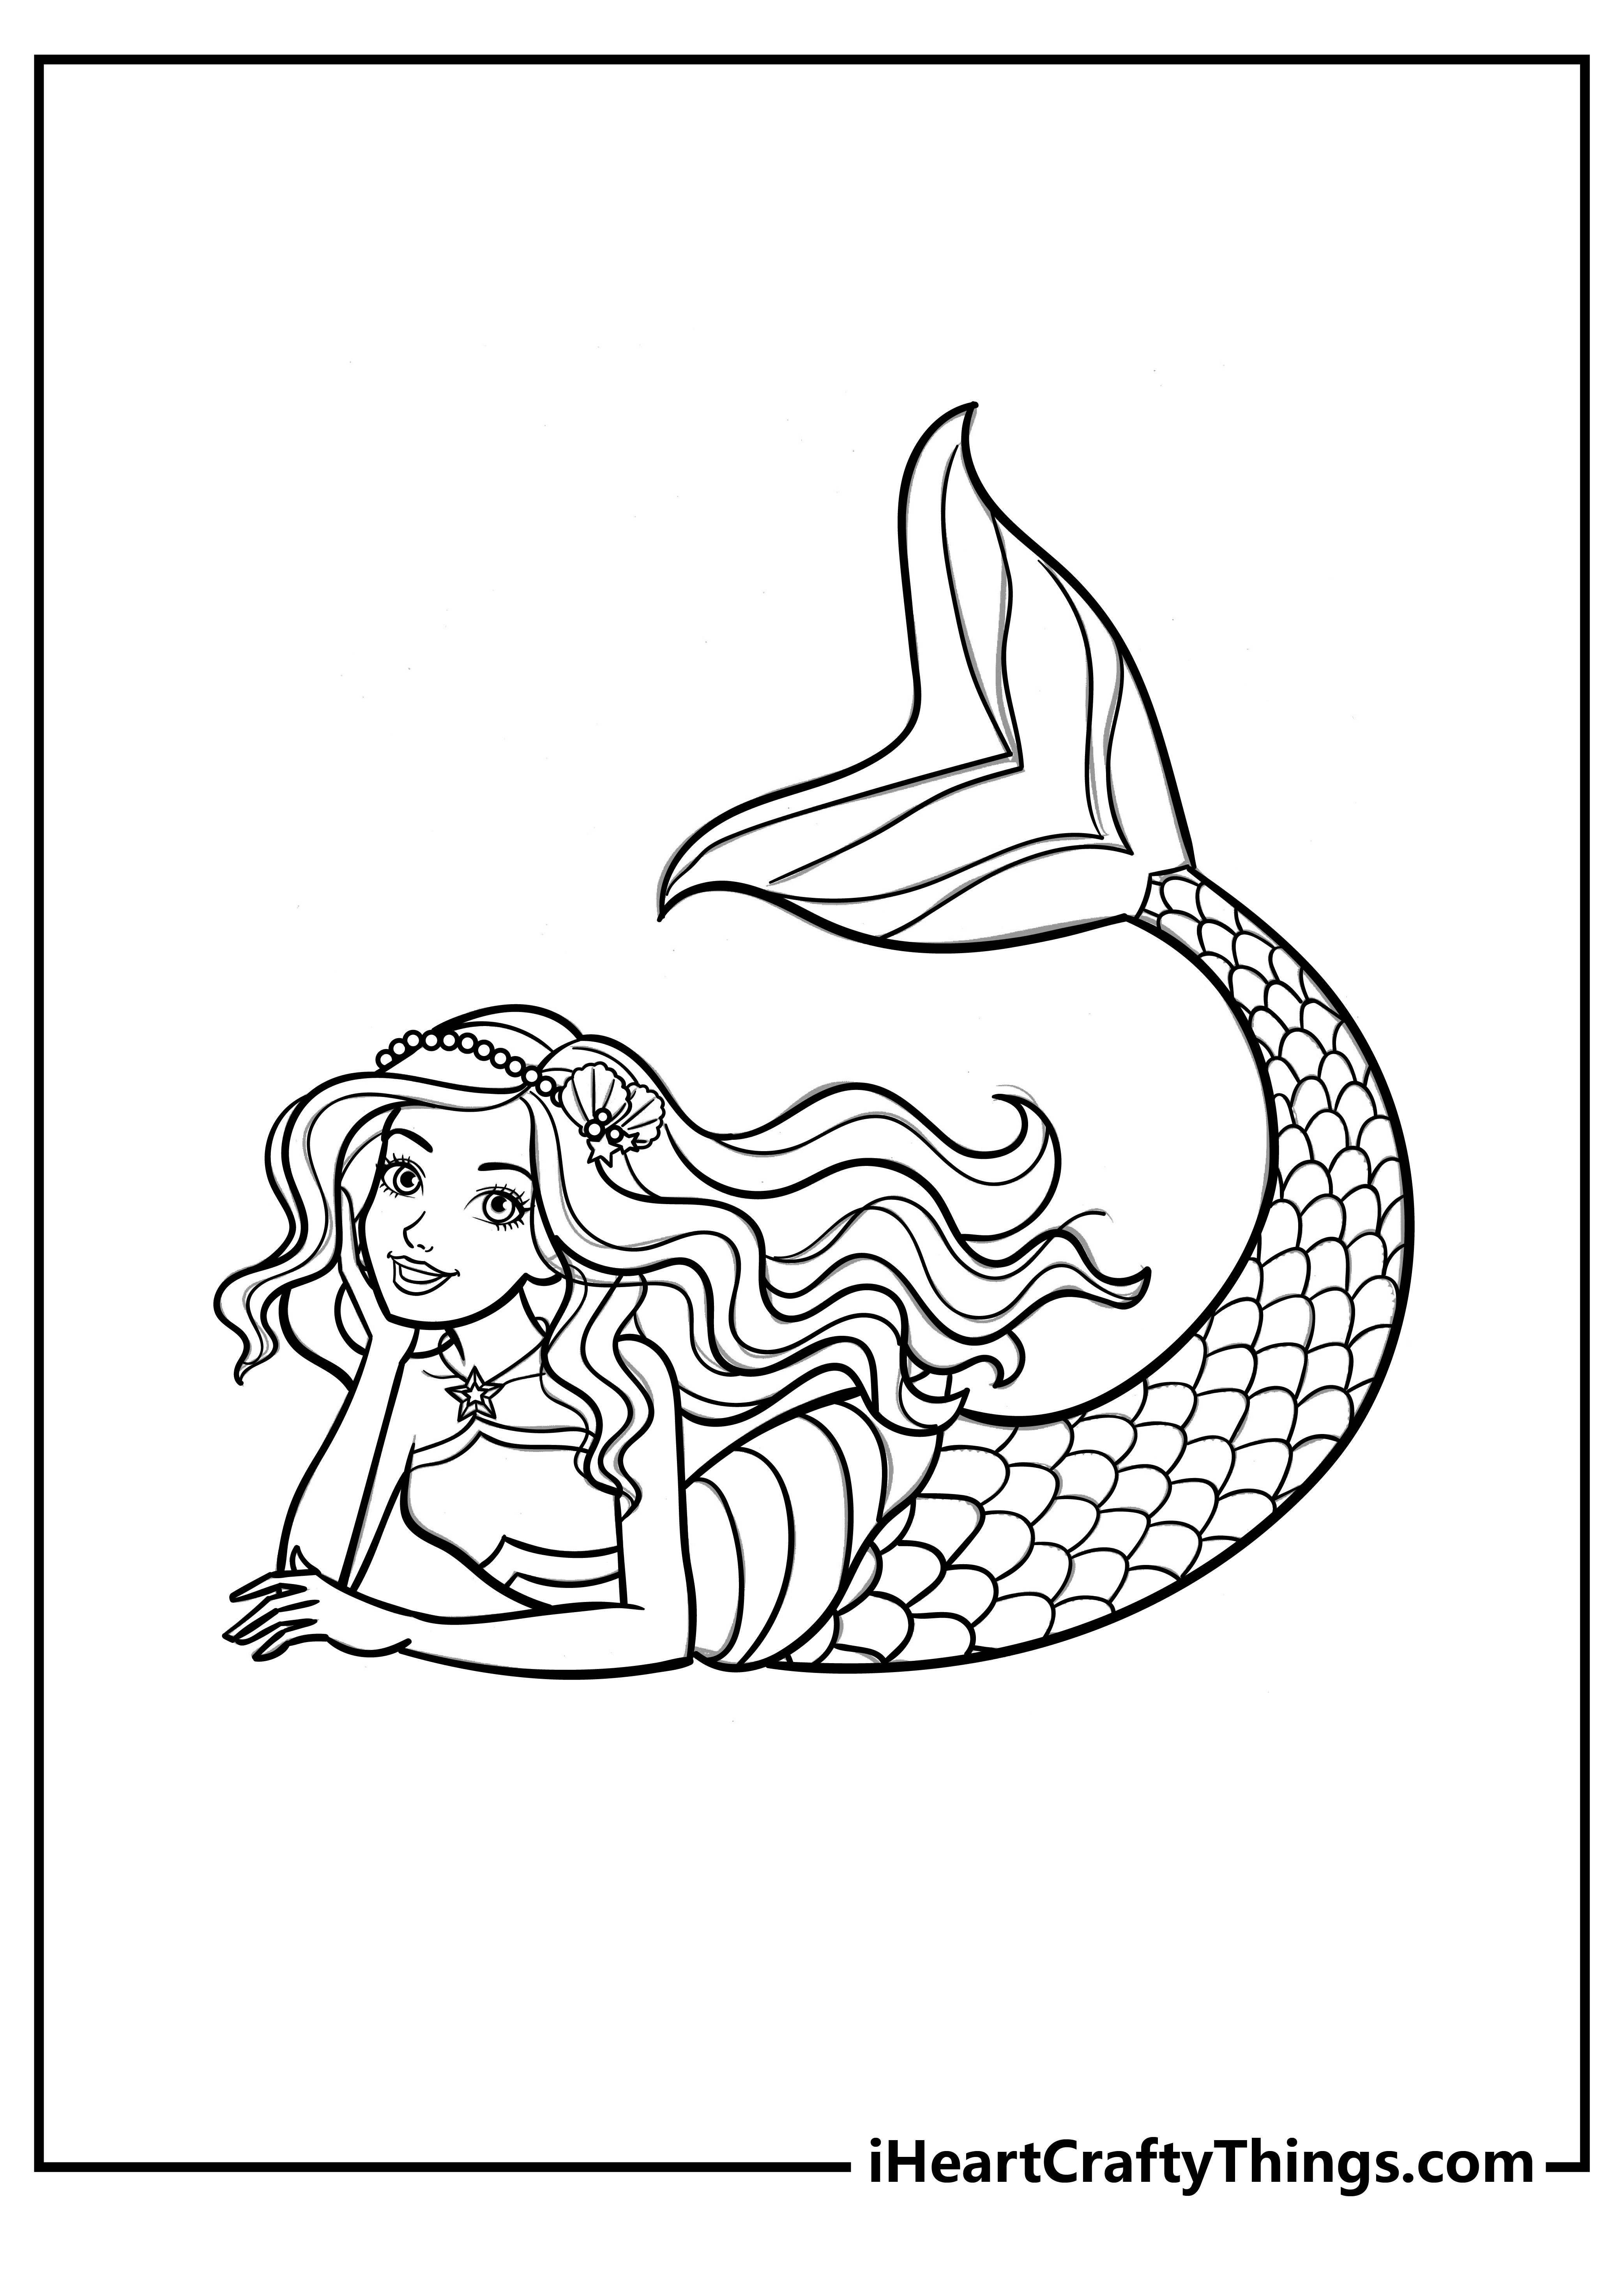 Barbie Mermaid Coloring Pages for adults free printable